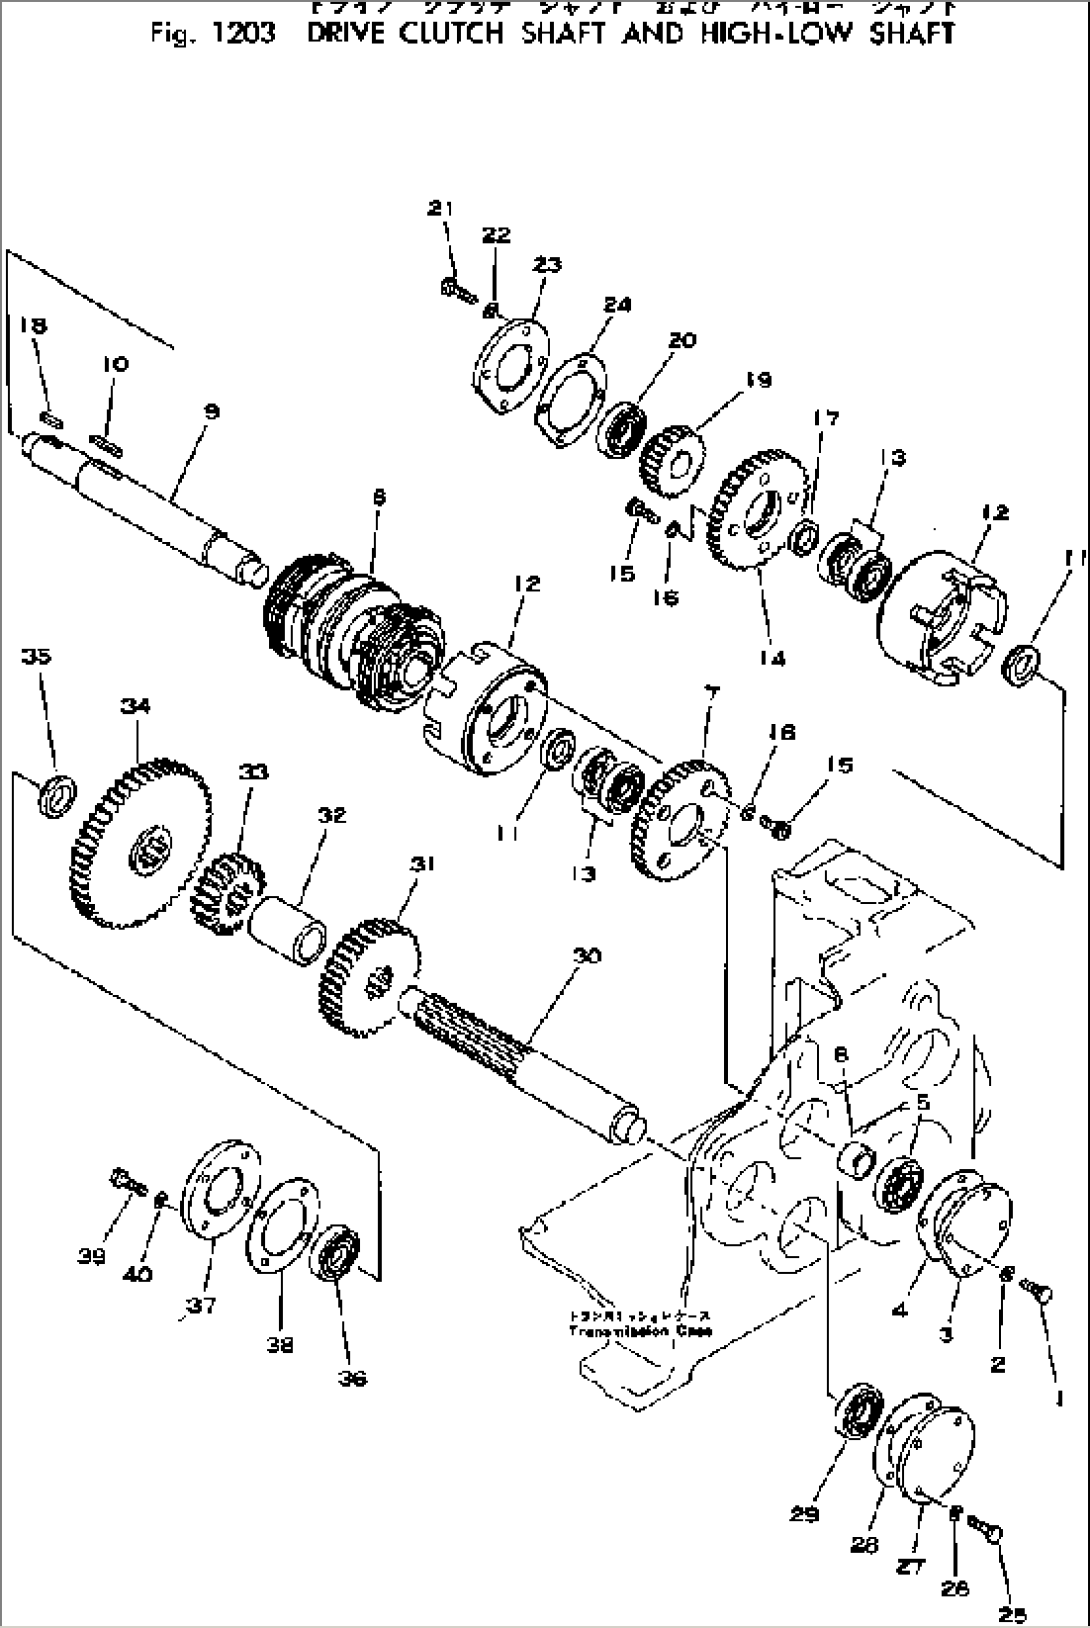 DRIVE CLUTCH SHAFT AND HIGH-LOW SHAFT